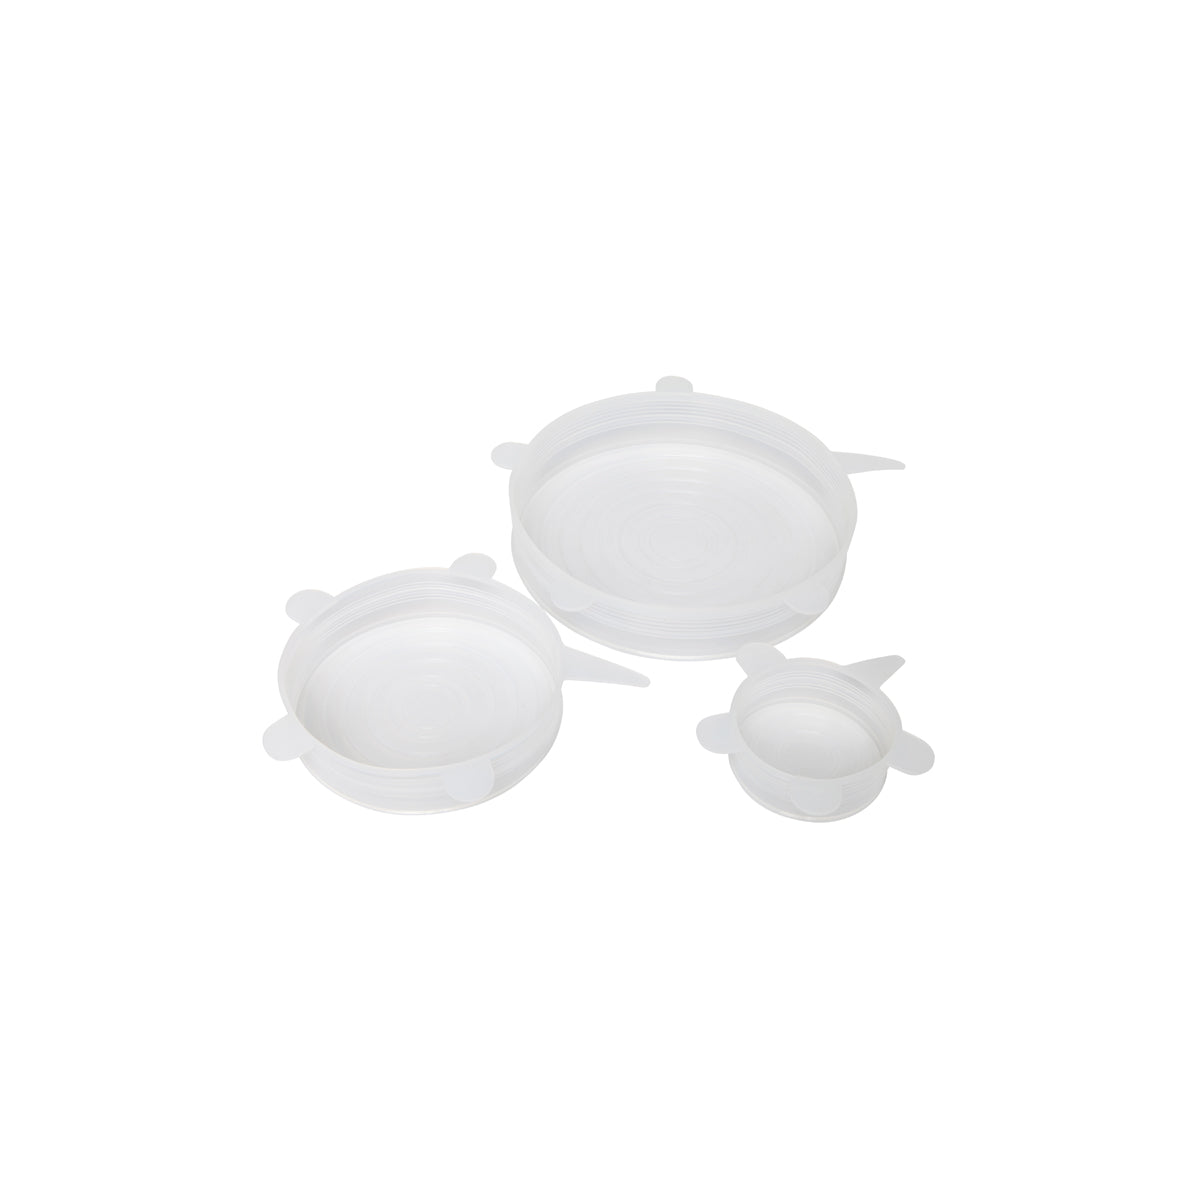 WLT43843 Wiltshire Reuseable Silicone Bowl Cover Set Of 3  Tomkin Australia Hospitality Supplies